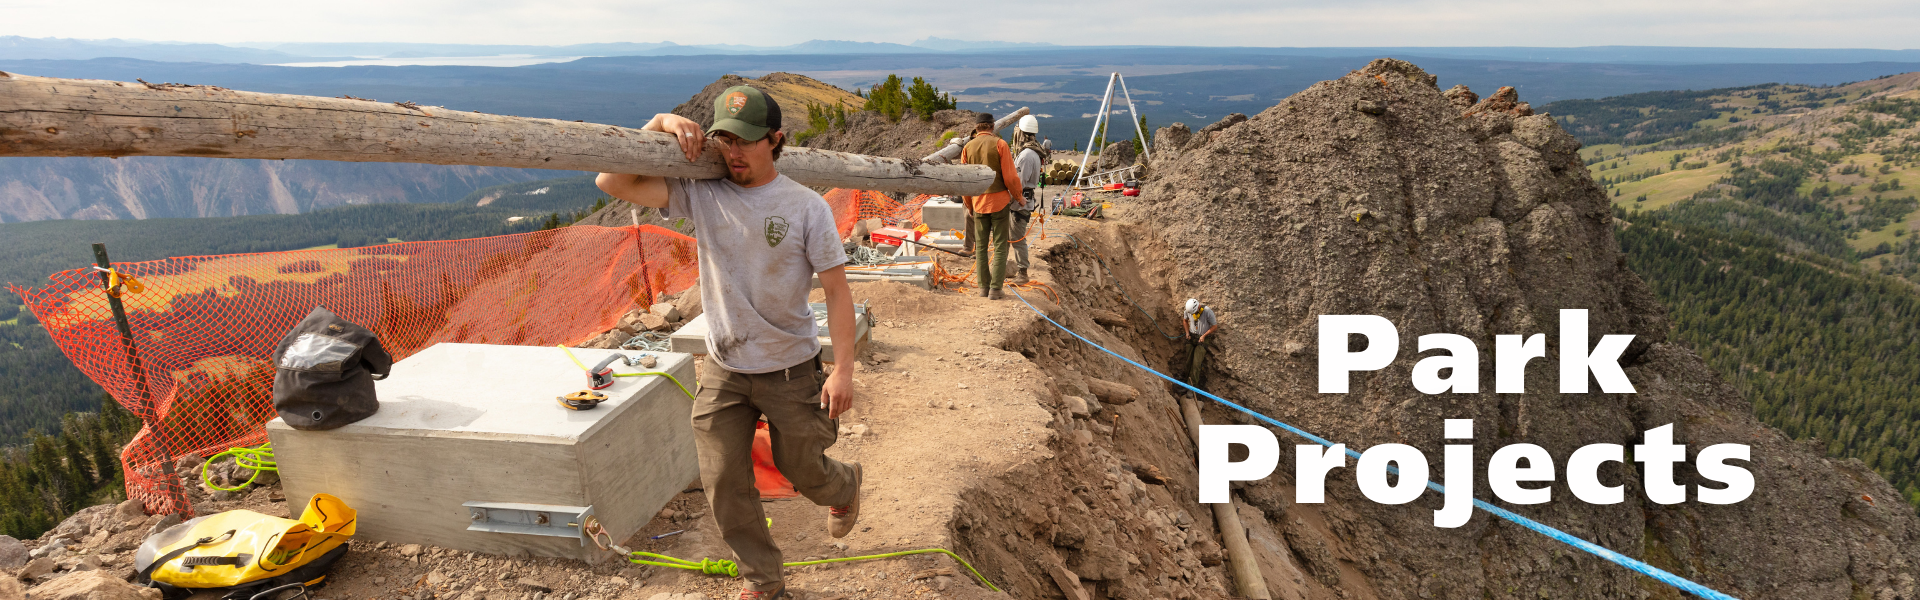 Section Header: construction work on a high-alpine ridgeline with overlaying text, "Park Projects"